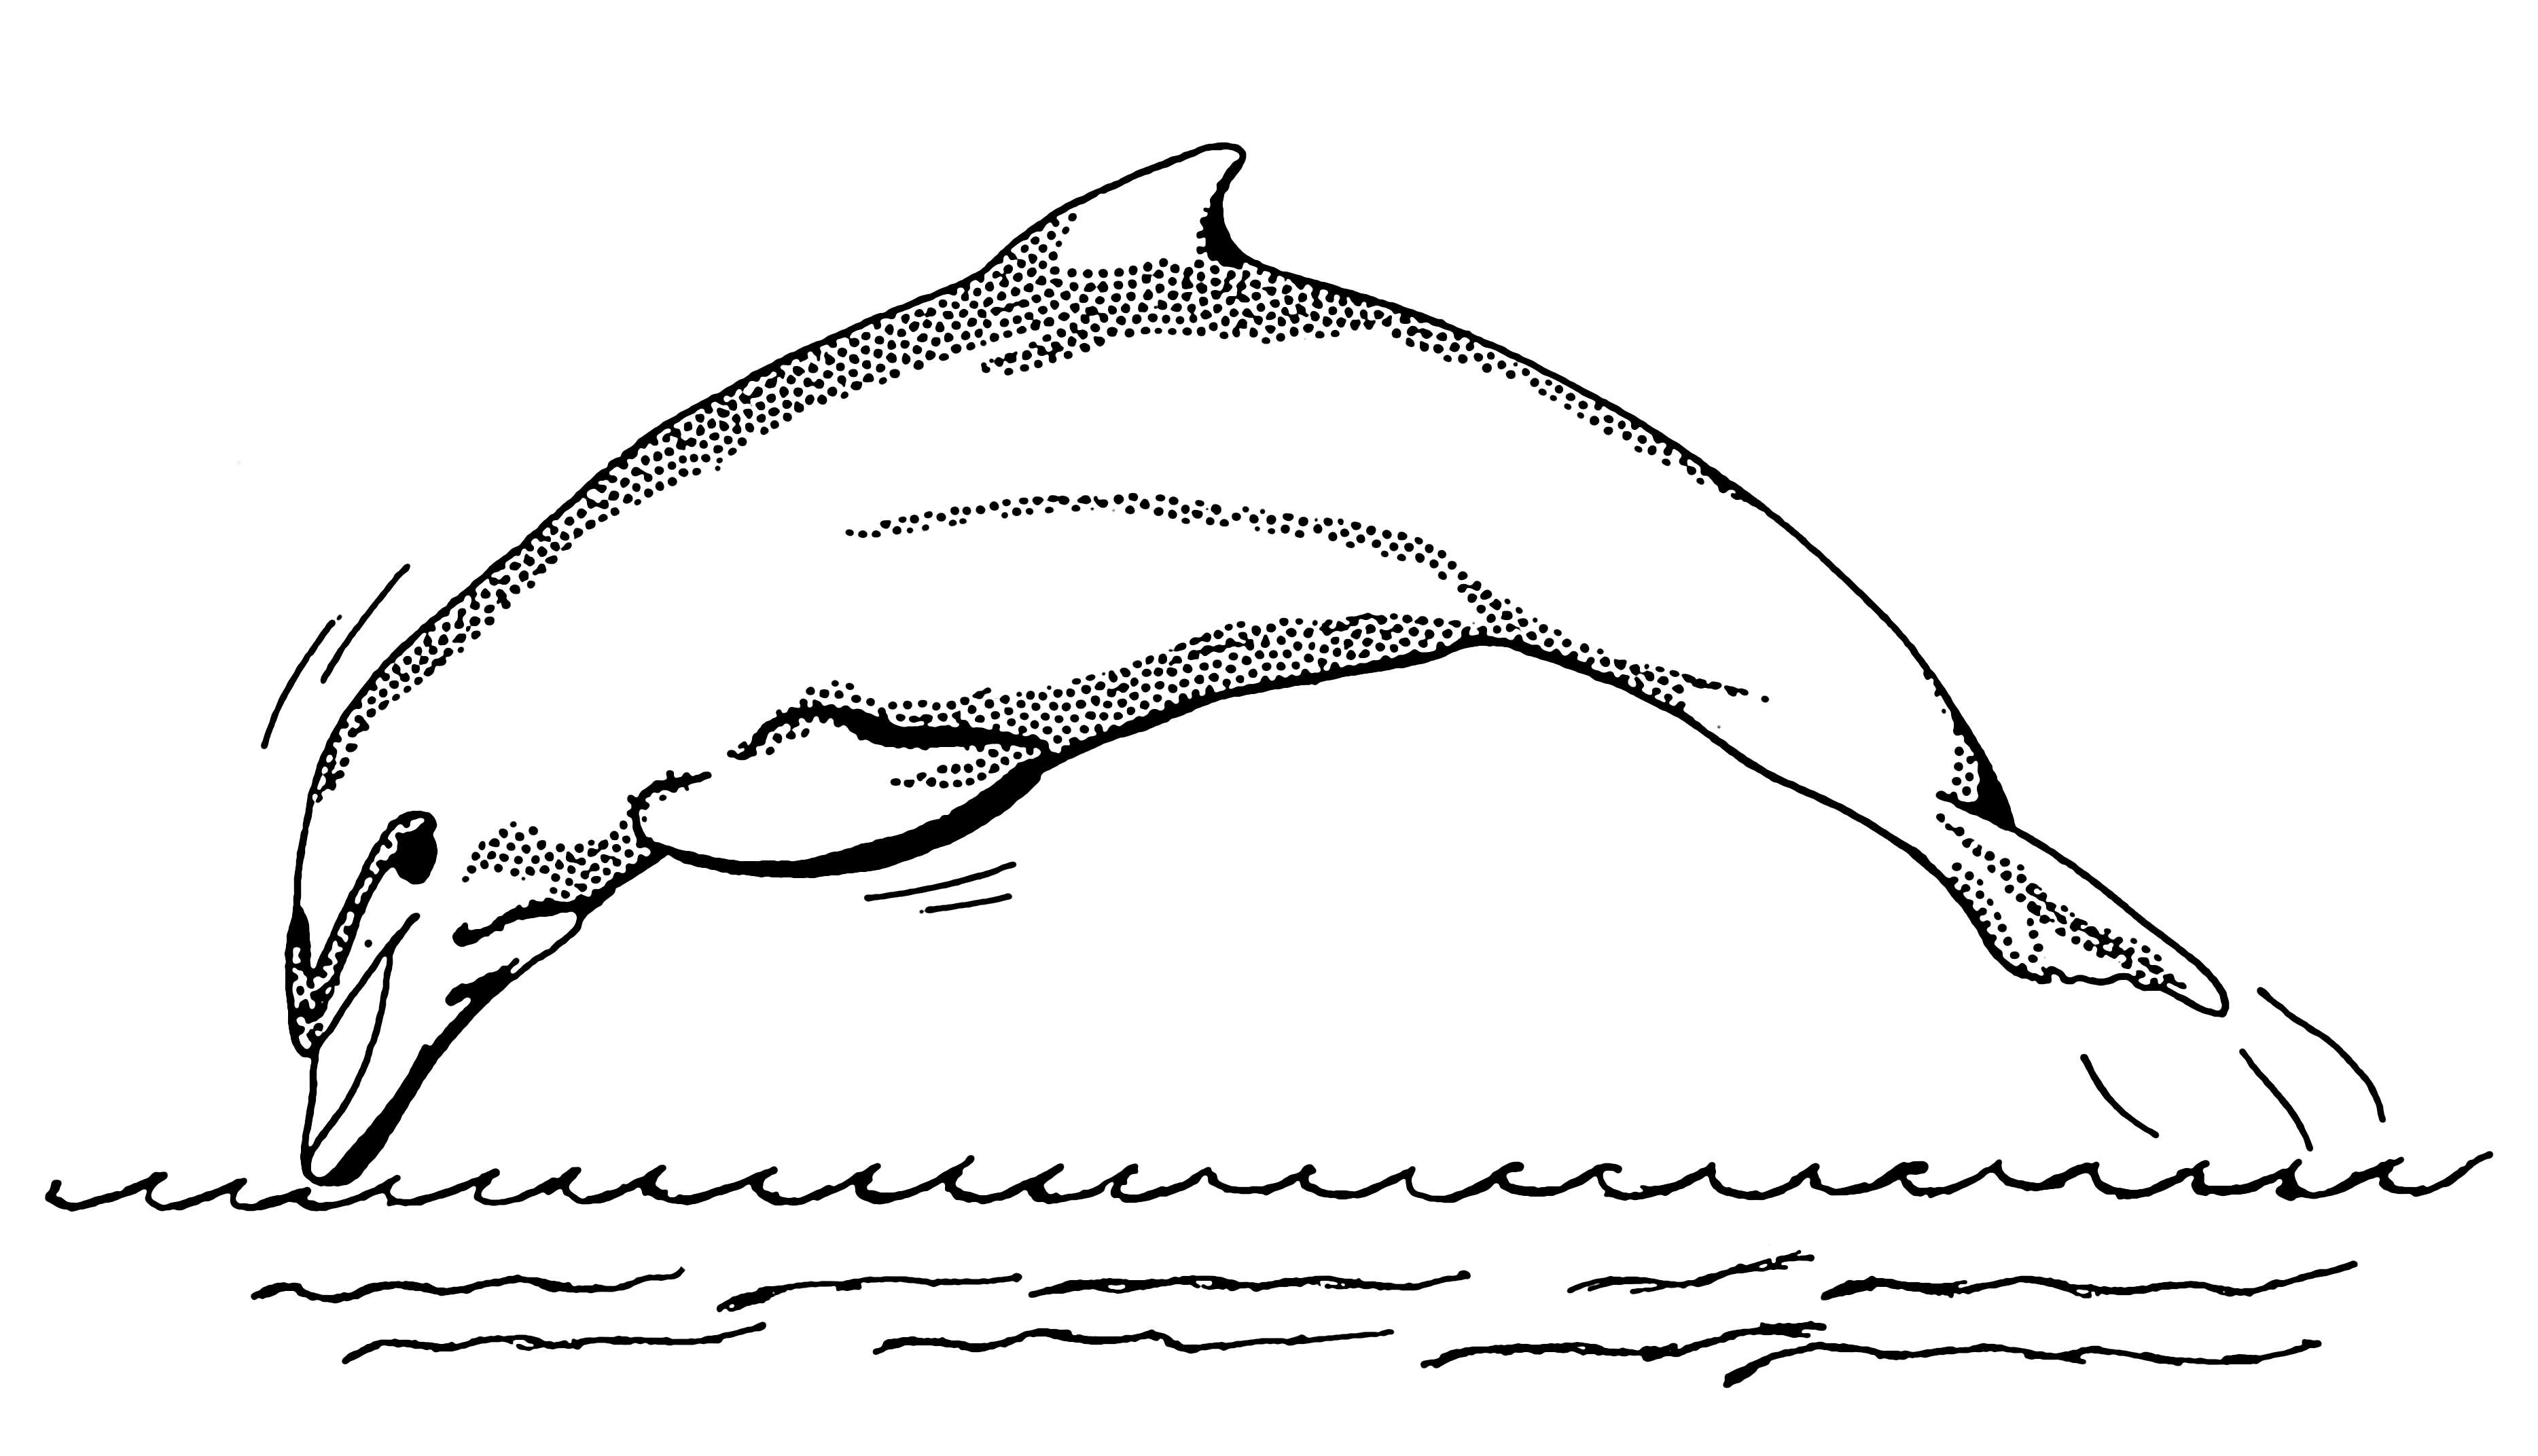 File:Dolphin 1 (PSF).png - Wikimedia Commons